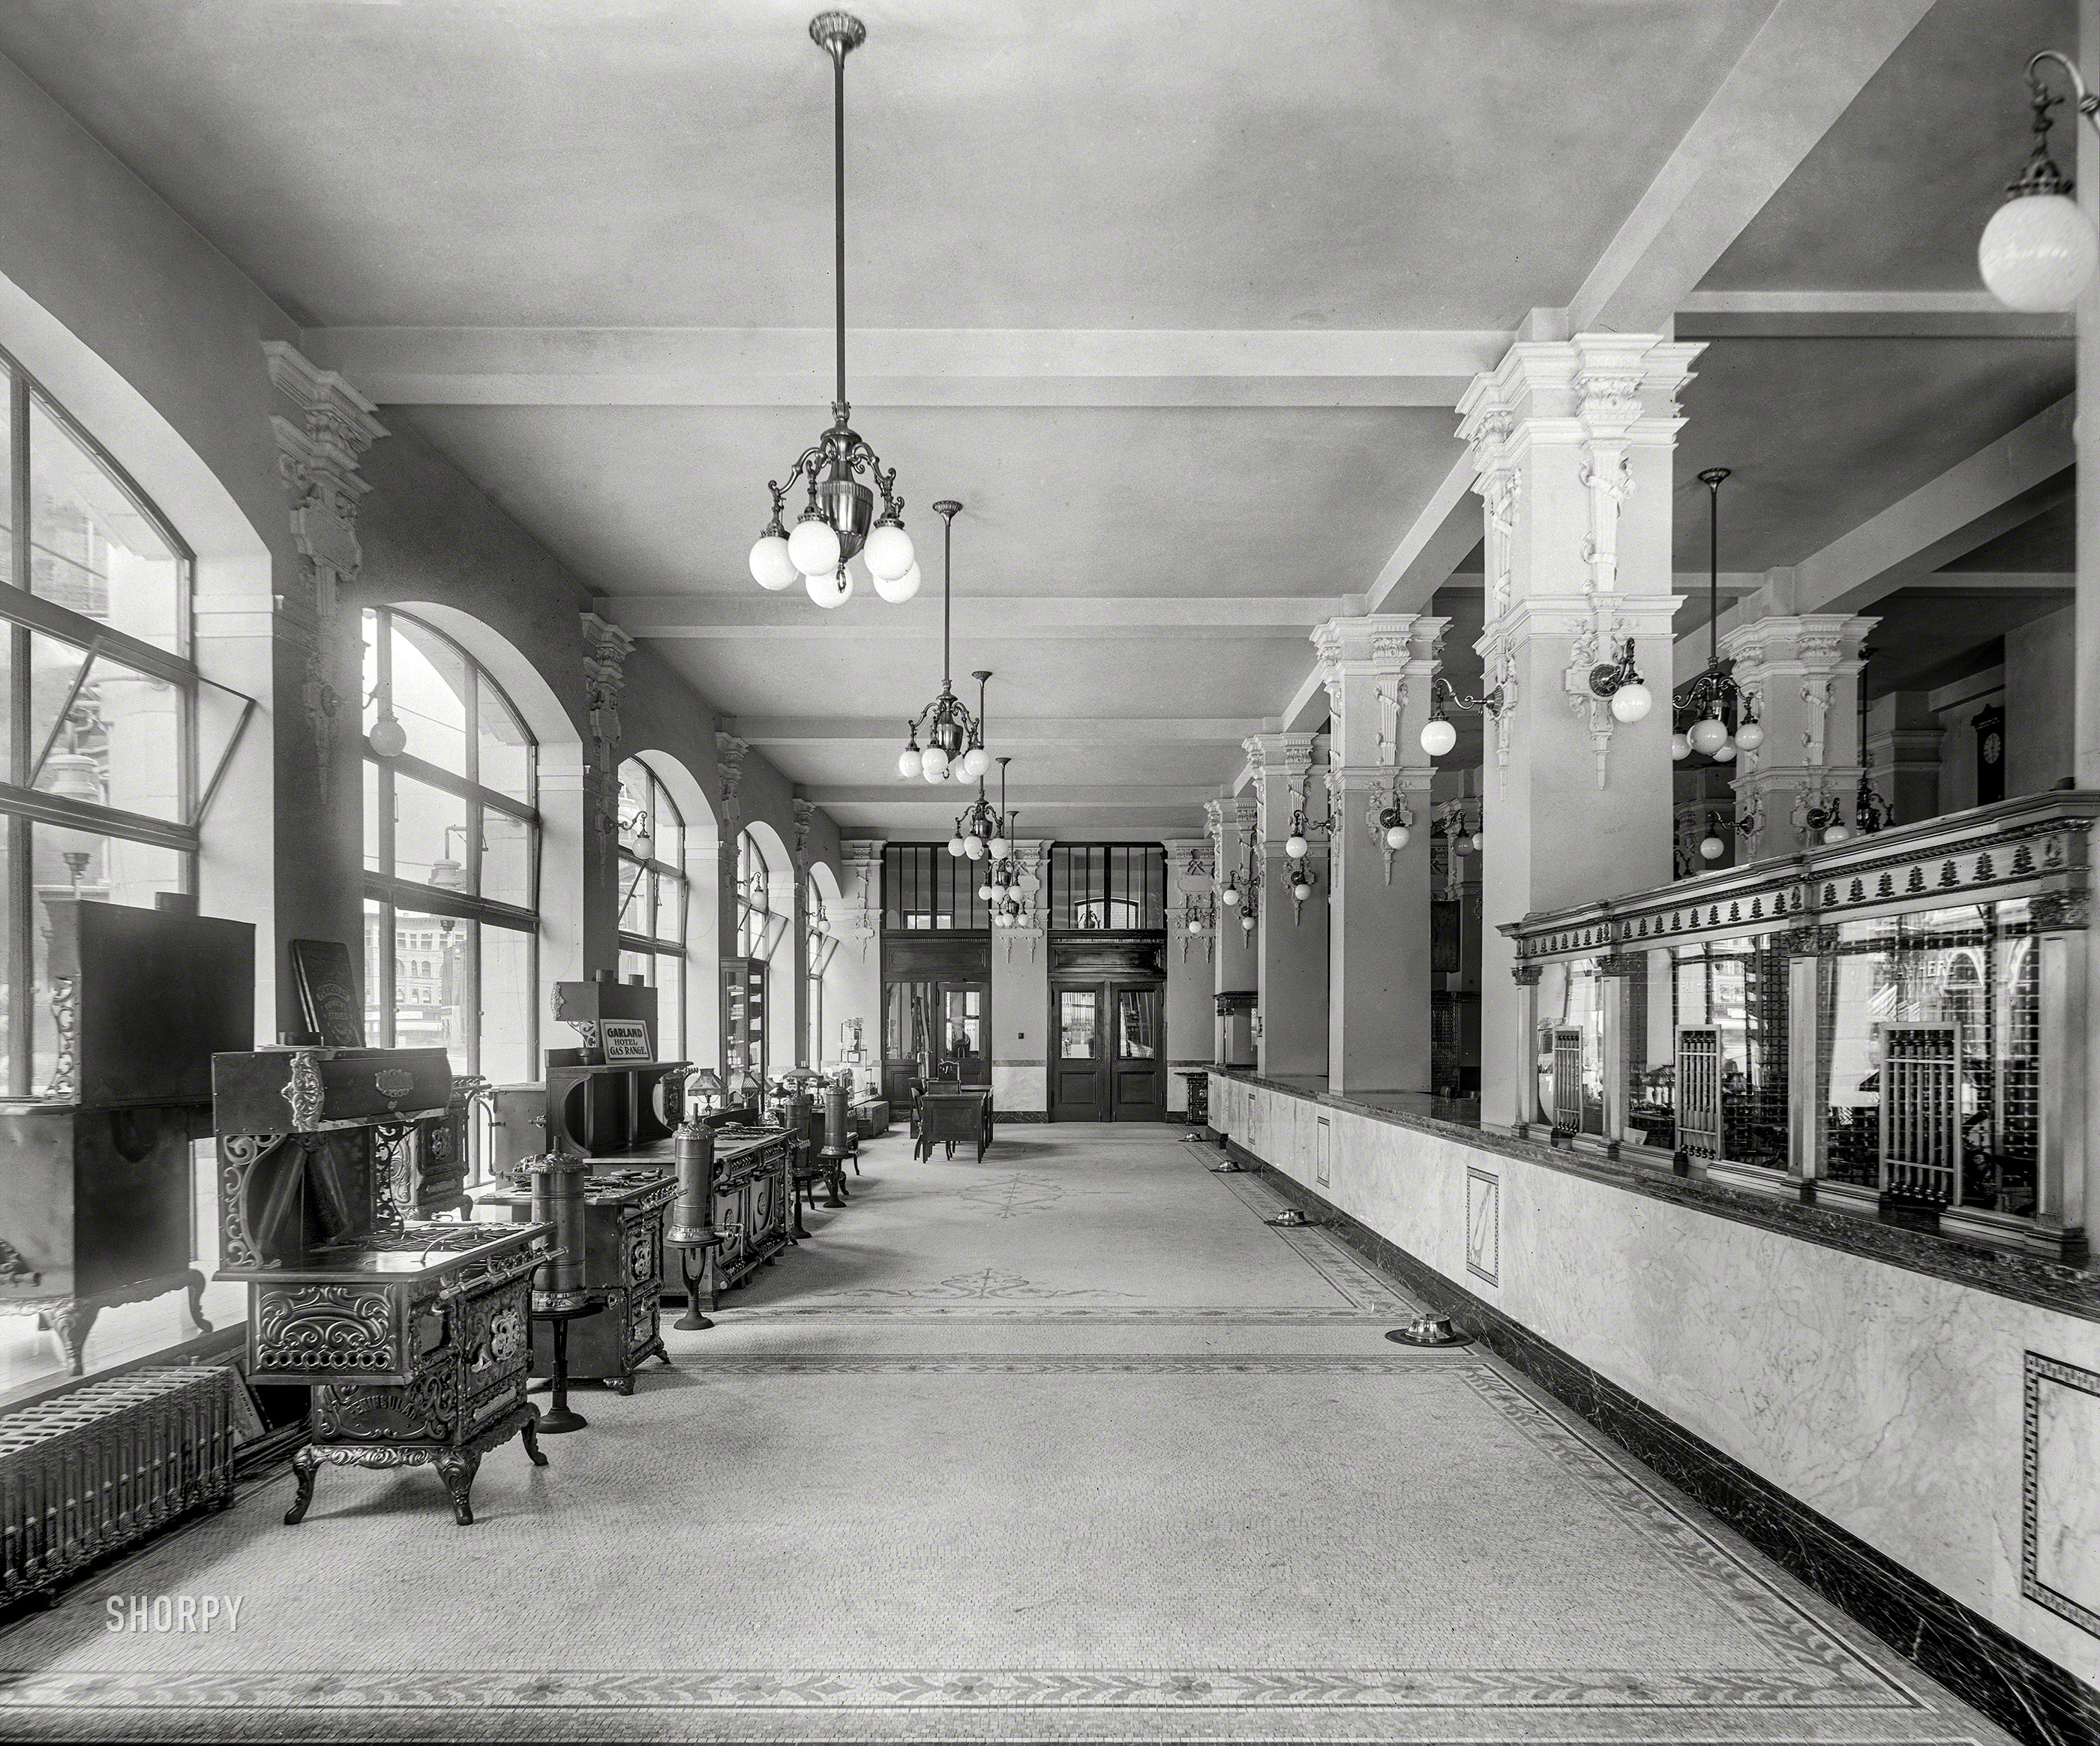 Detroit circa 1908. "Gas office, first floor, looking back; cashier windows at right." The lobby of the Detroit City Gas Company. 8x10 inch glass negative, Detroit Publishing Co. View full size.